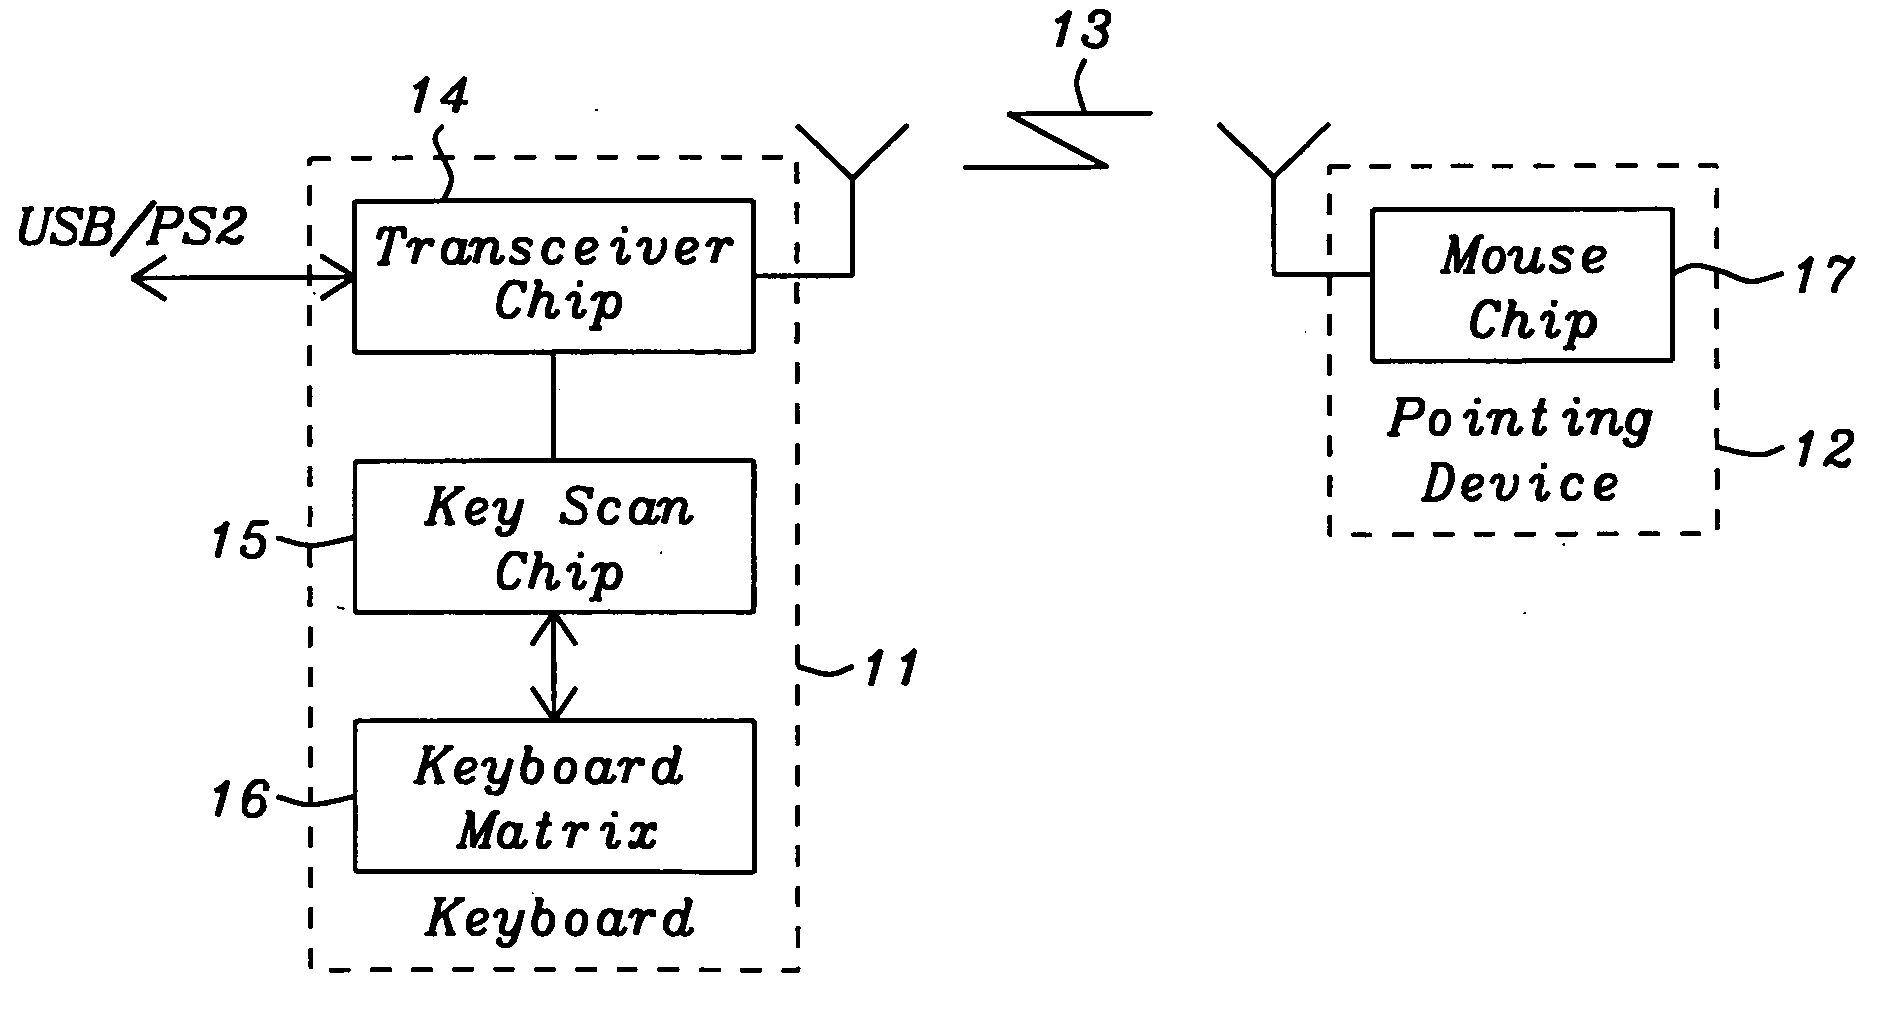 Combined keyboard and wireless transceiver